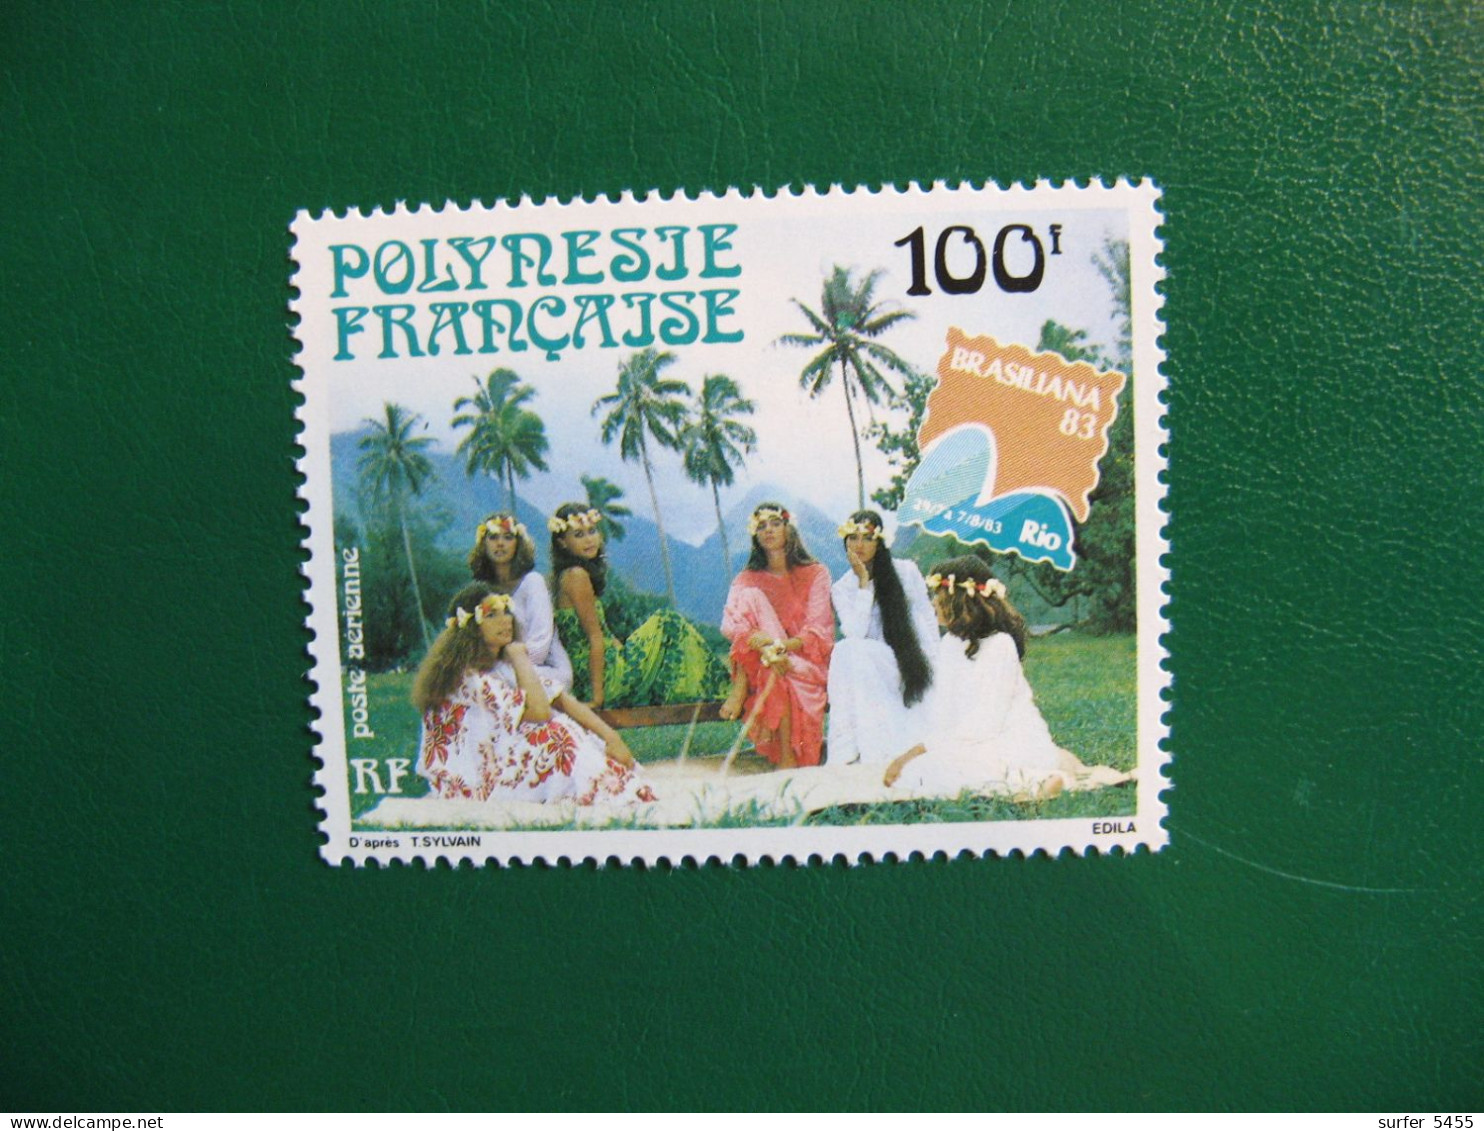 P0LYNESIE PO AERIENNE N° 176 TIMBRE NEUF ** LUXE - MNH - SERIE COMPLETE - FACIALE 0,84 EURO - Neufs